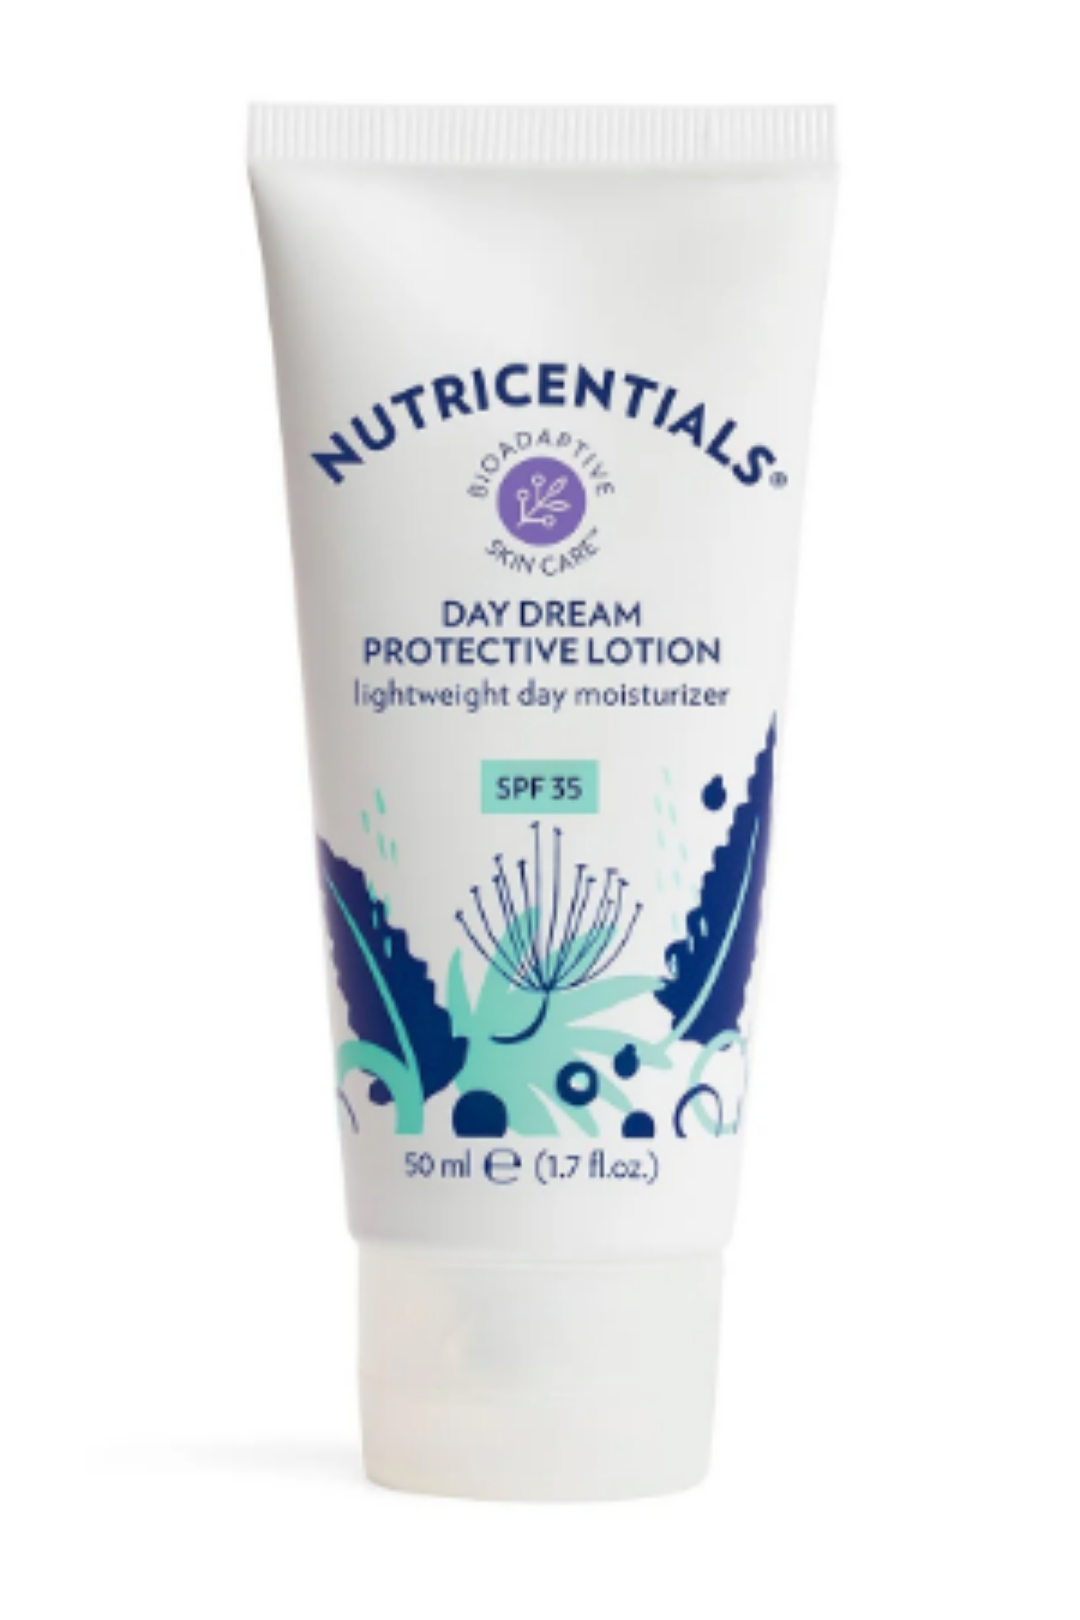 Nutricentials Bioadaptive Skin Care™ Day Dream Protective Lotion with SPF 35